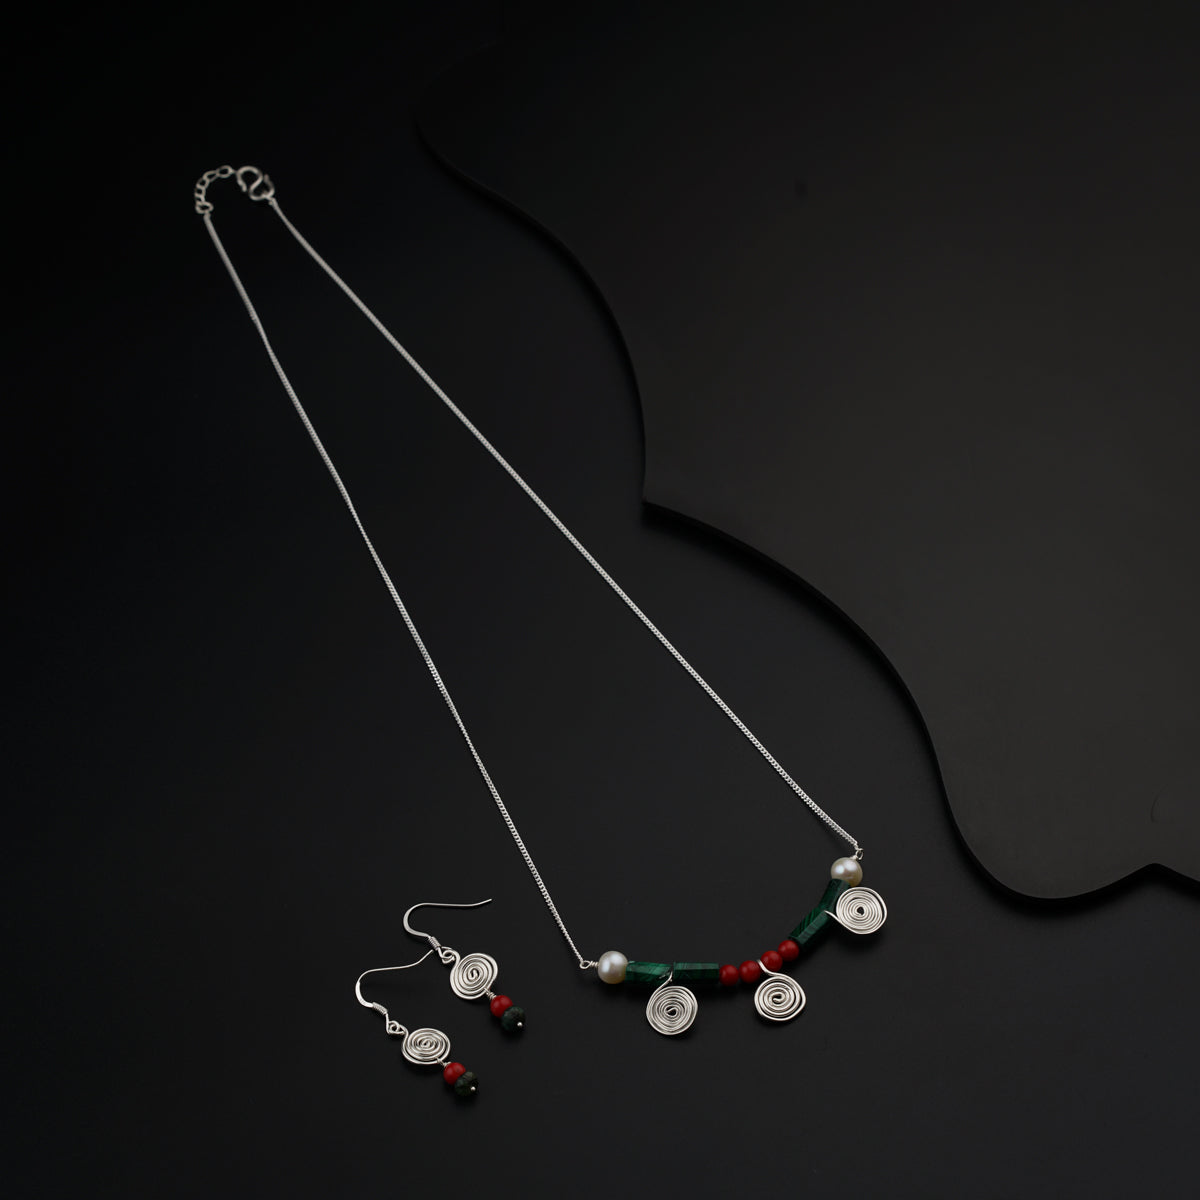 Silver Spiral Set with Malachite, Corals and Pearls